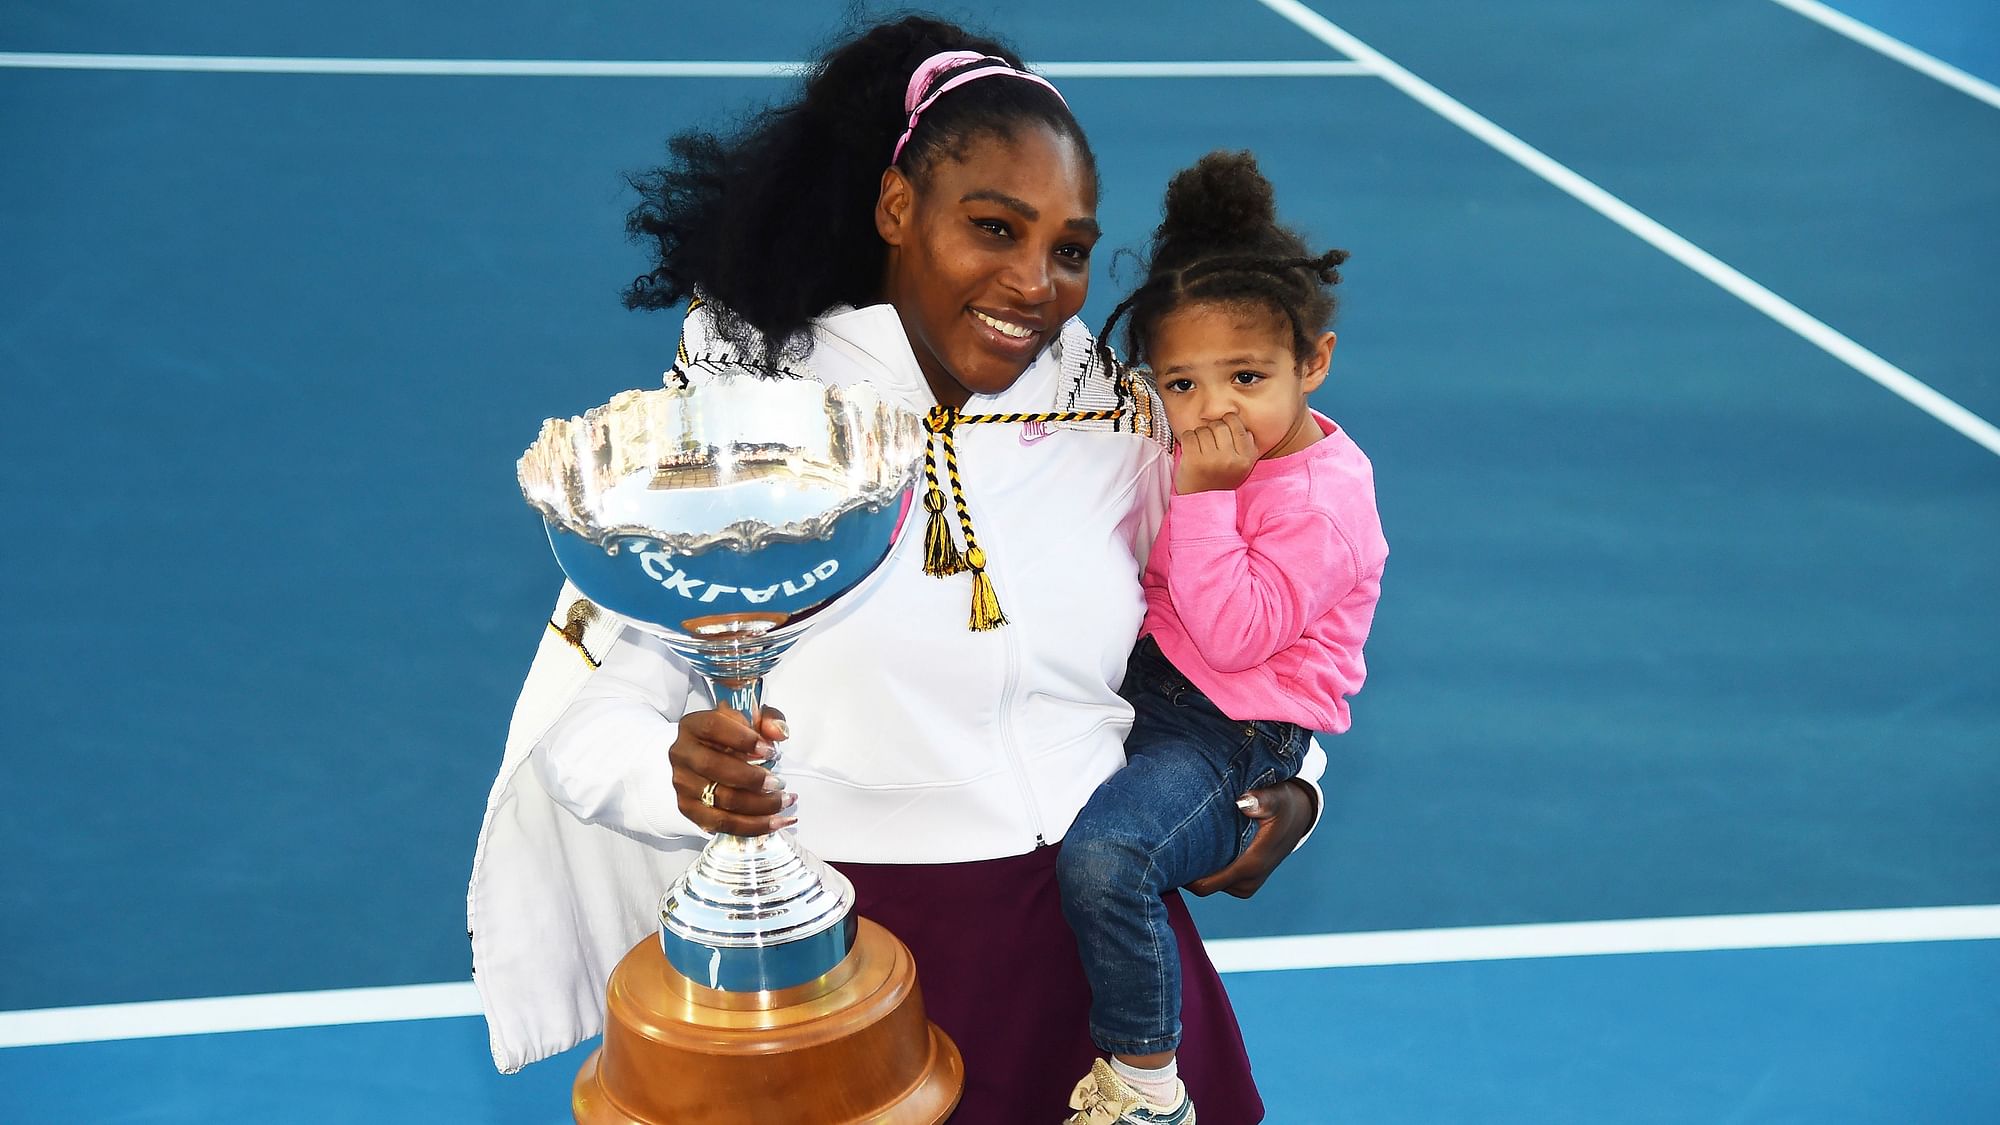 Serena Williams from the United States with daughter Alexis Olympia Ohanian Jr and the ASB trophy after winning her singles finals match against United States Jessica Pegula at the ASB Classic in Auckland, New Zealand, Sunday, Jan 12, 2020.